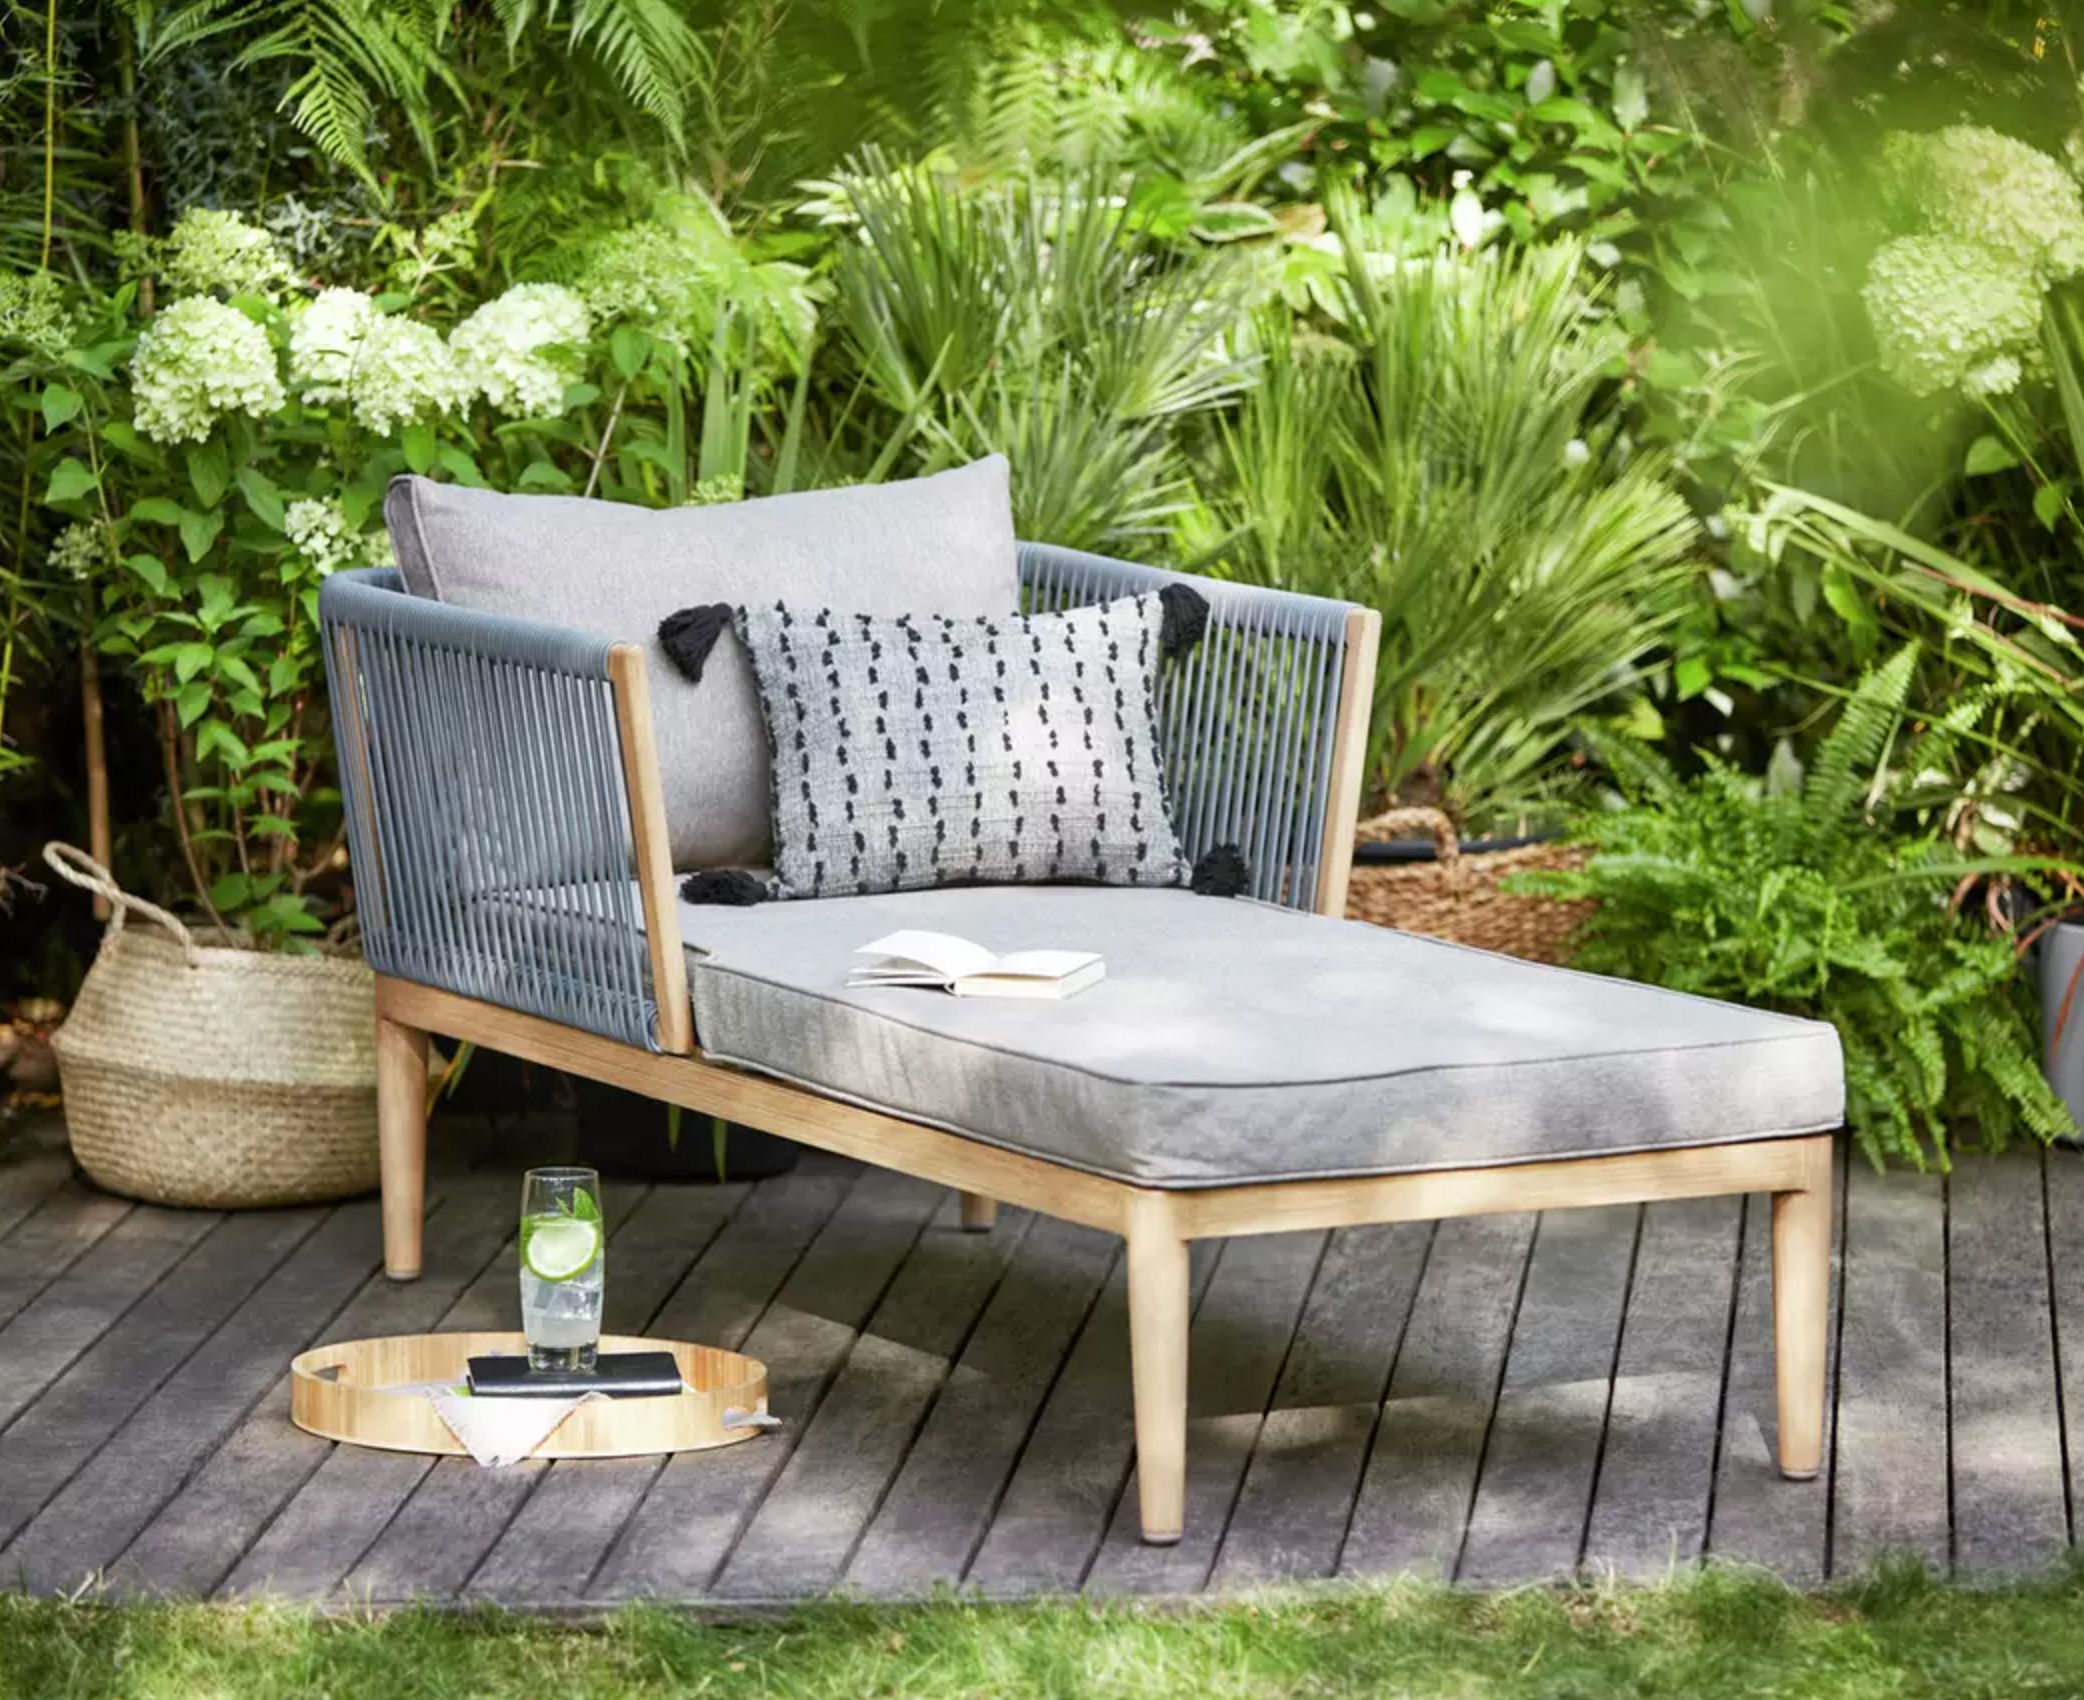 Top Tips for Choosing Comfortable and
Stylish Garden Loungers